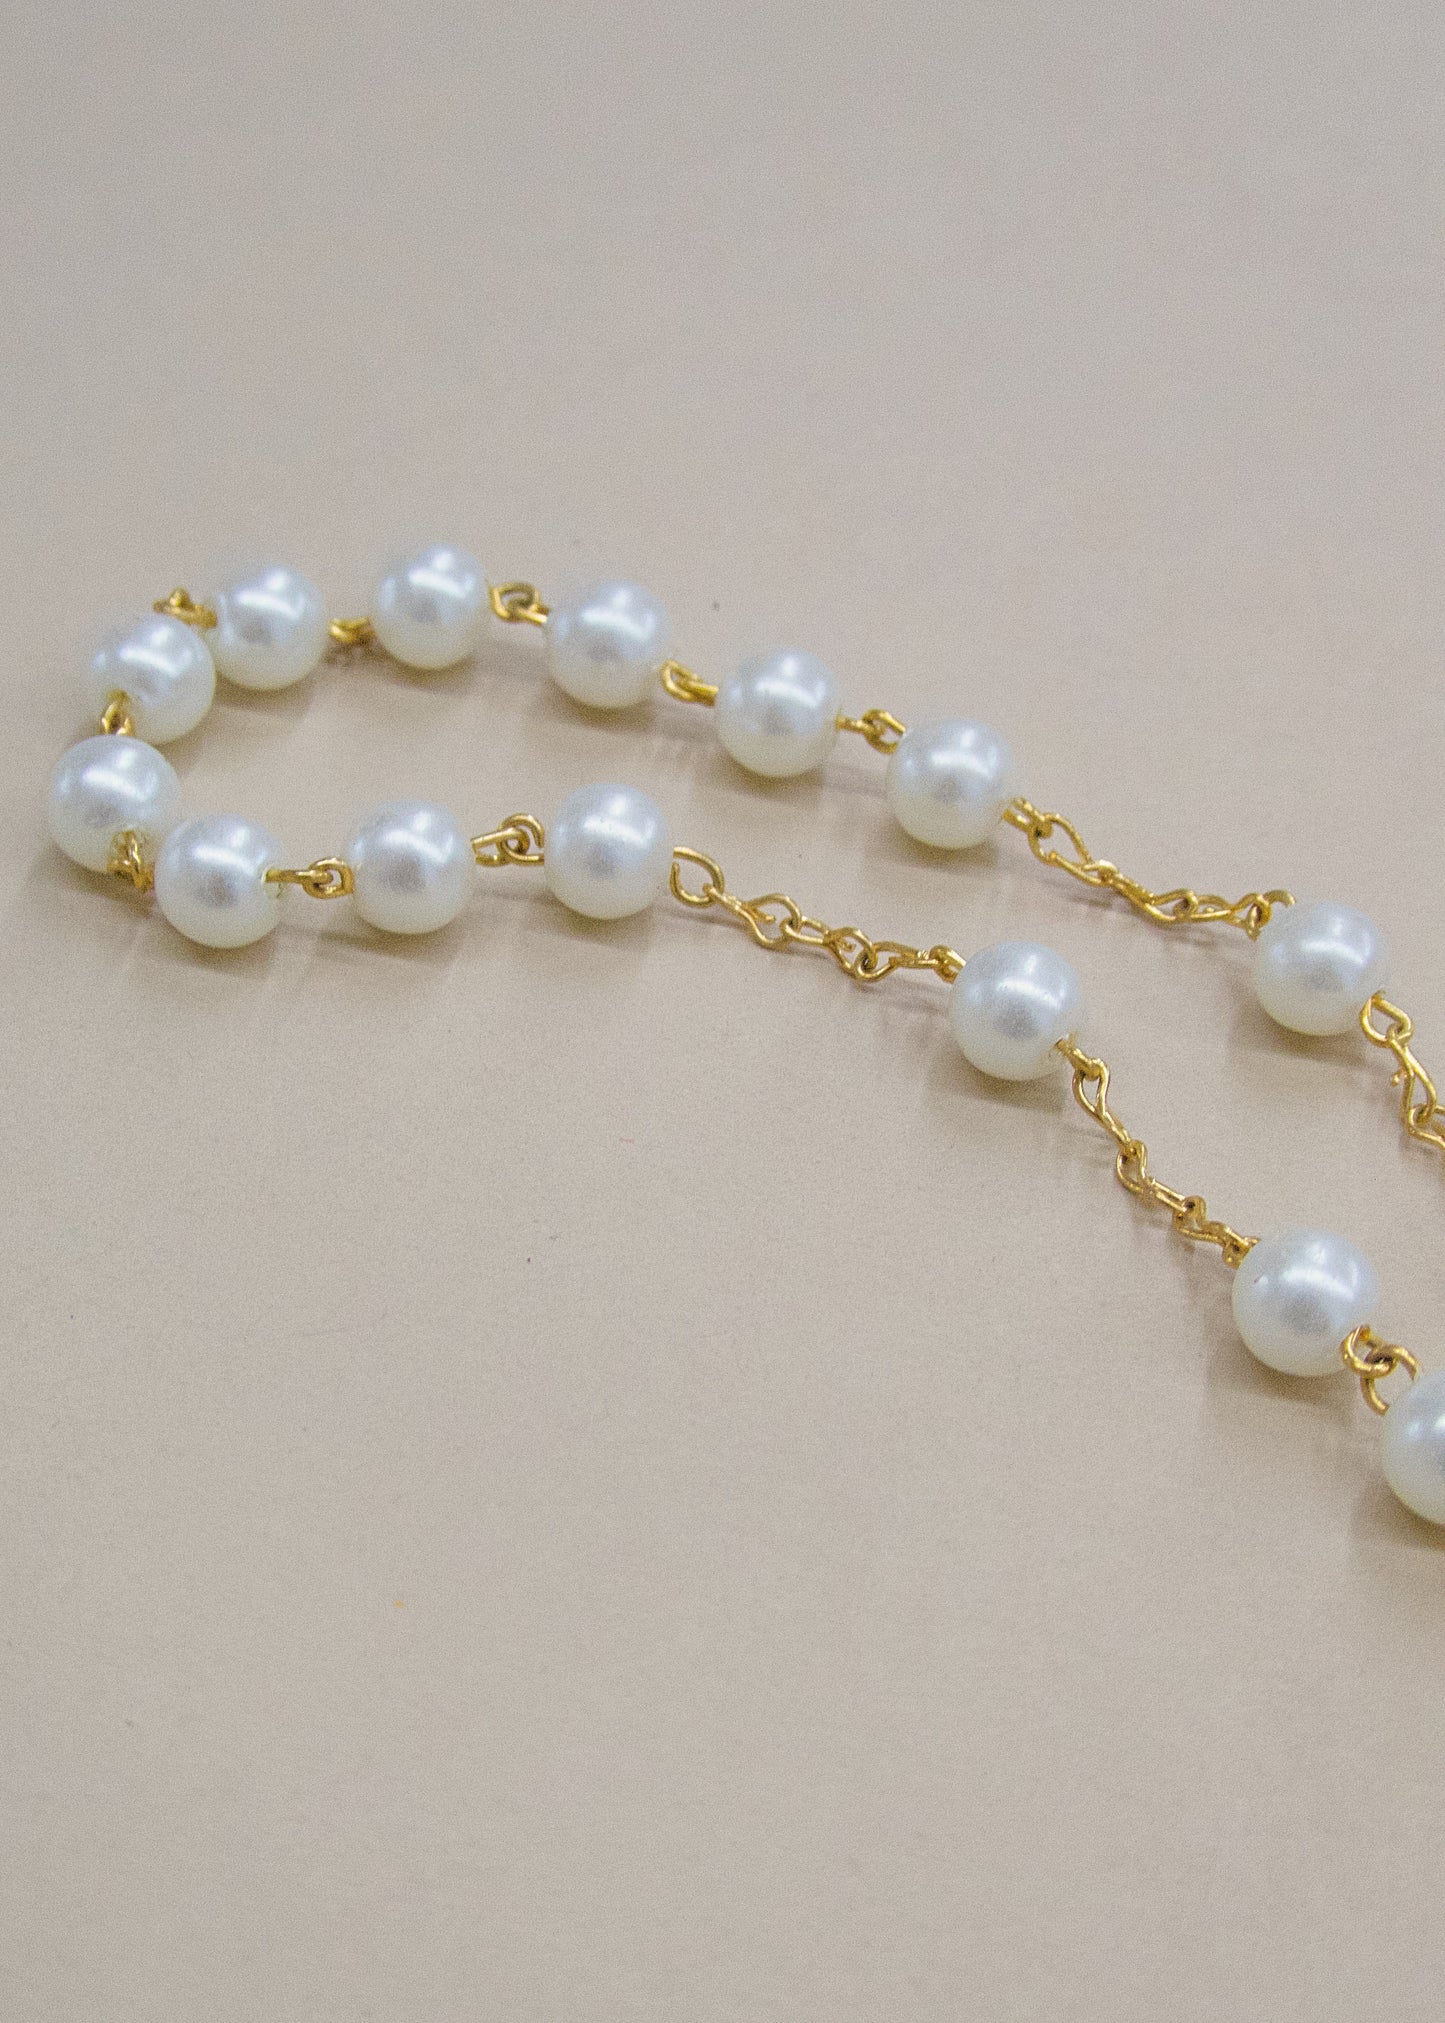 Vintage Faux Pearl & Gold Square Cross Rosary